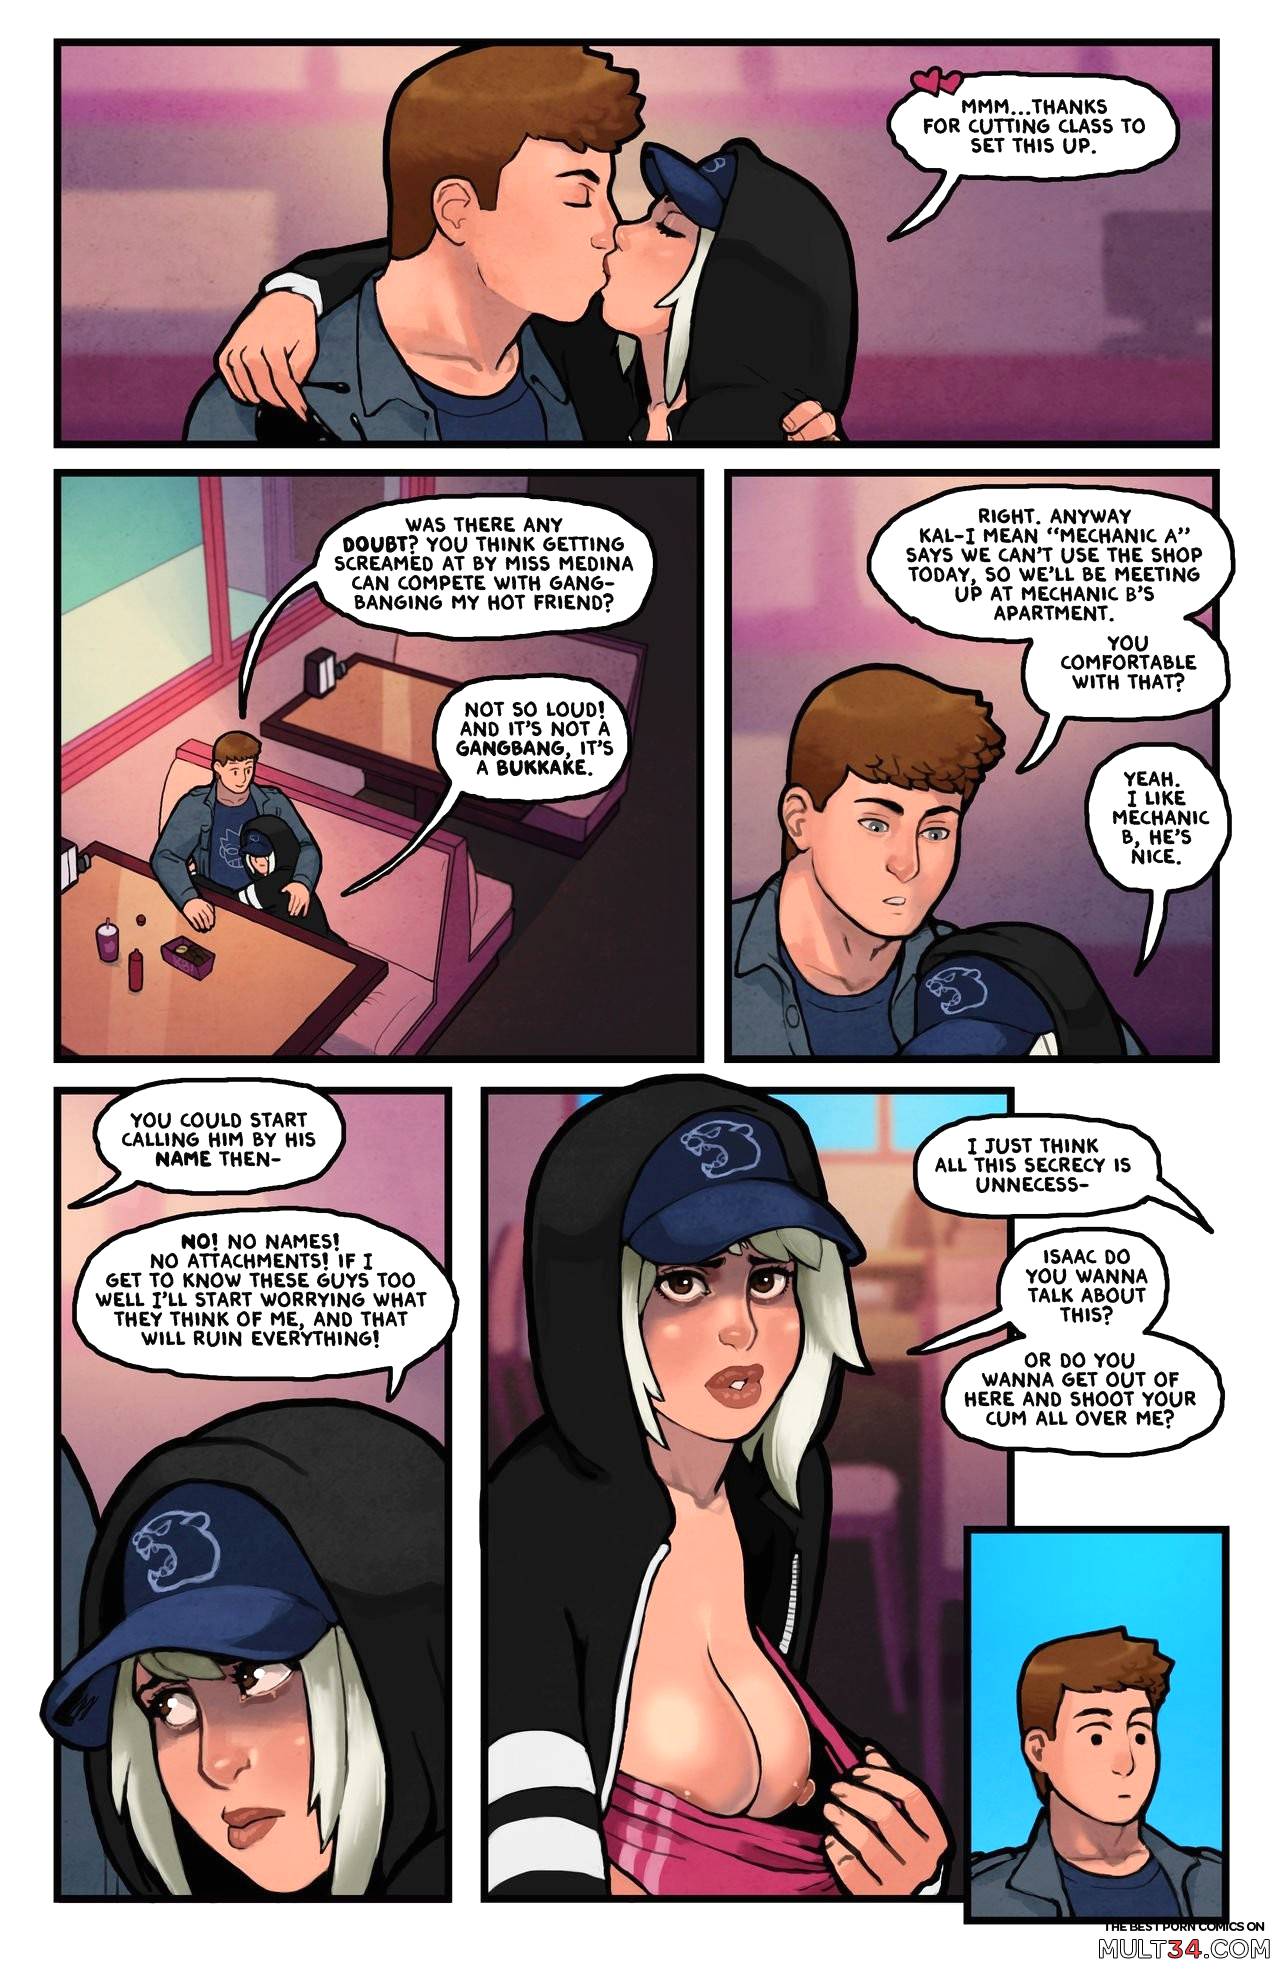 This Romantic World 6 page 3